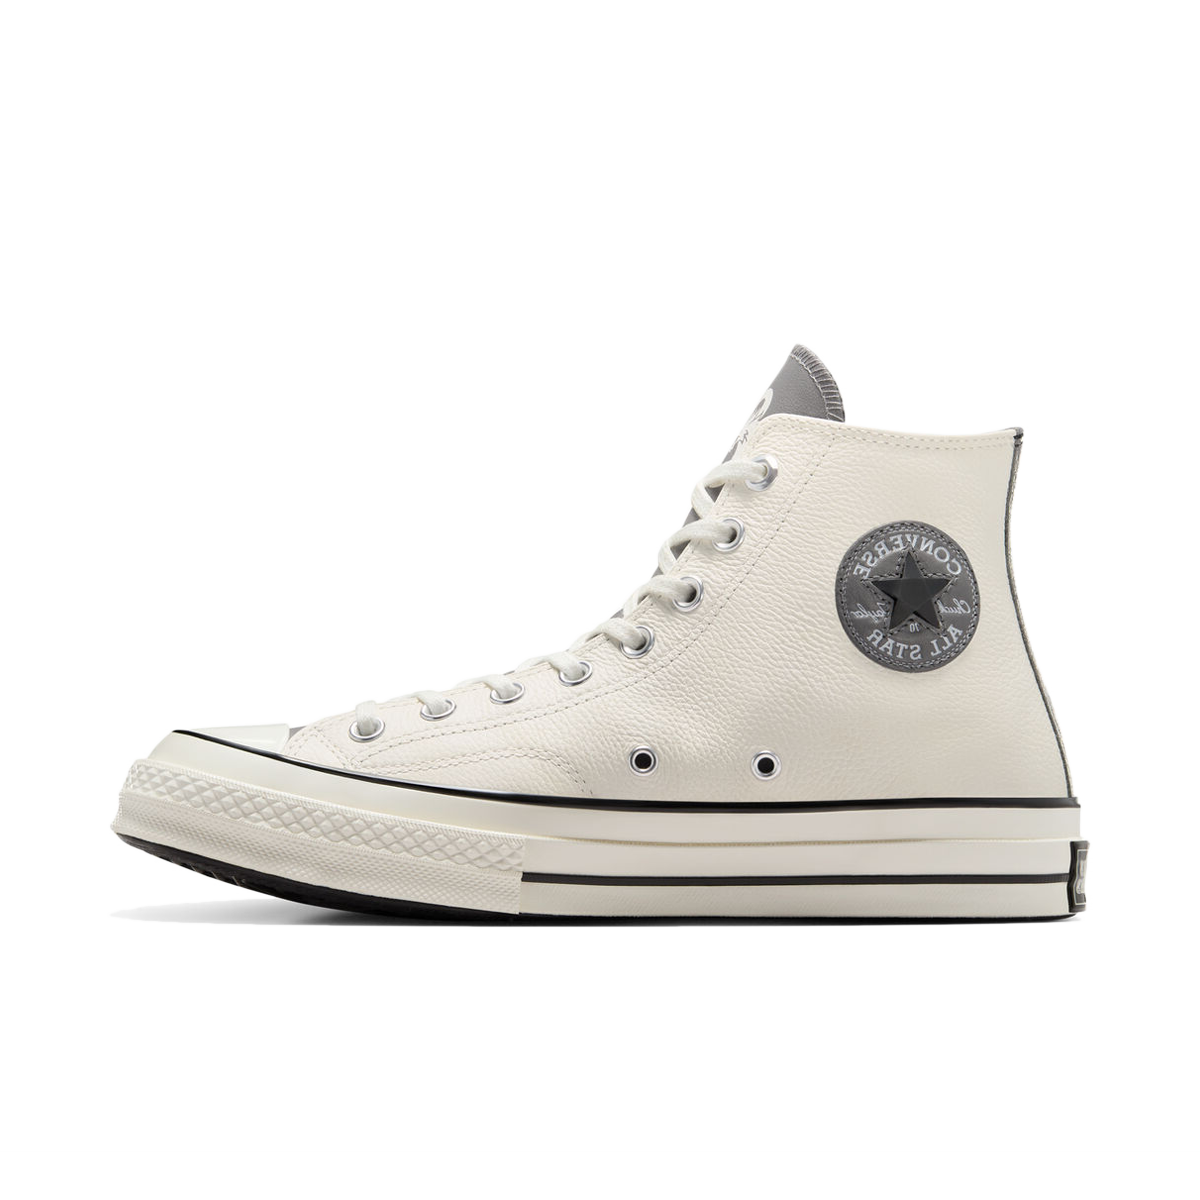 Dungeons & Dragons x Converse Chuck 70 Leather 'The Dice Taketh Away' A09884C